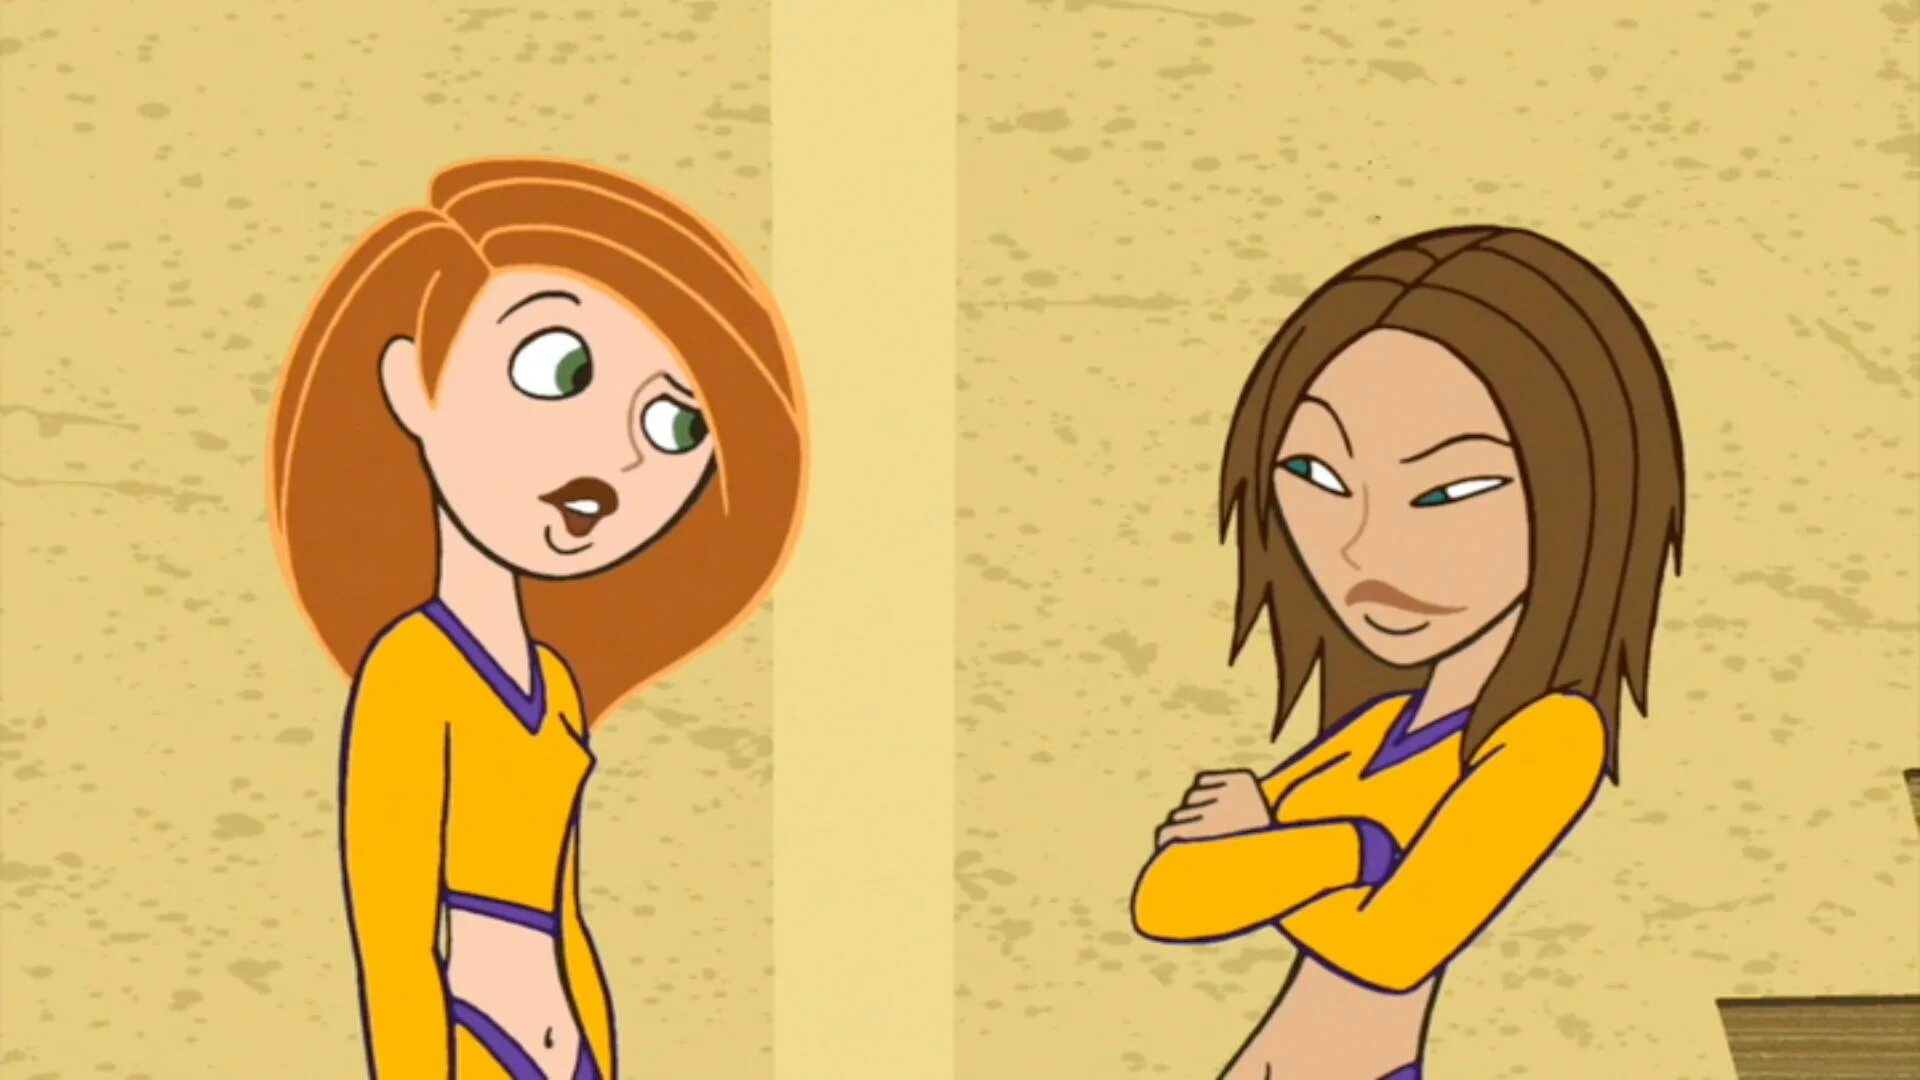 Possible missing. Kim possible Crossover. Kim possible r34. Kim possible next Generation.